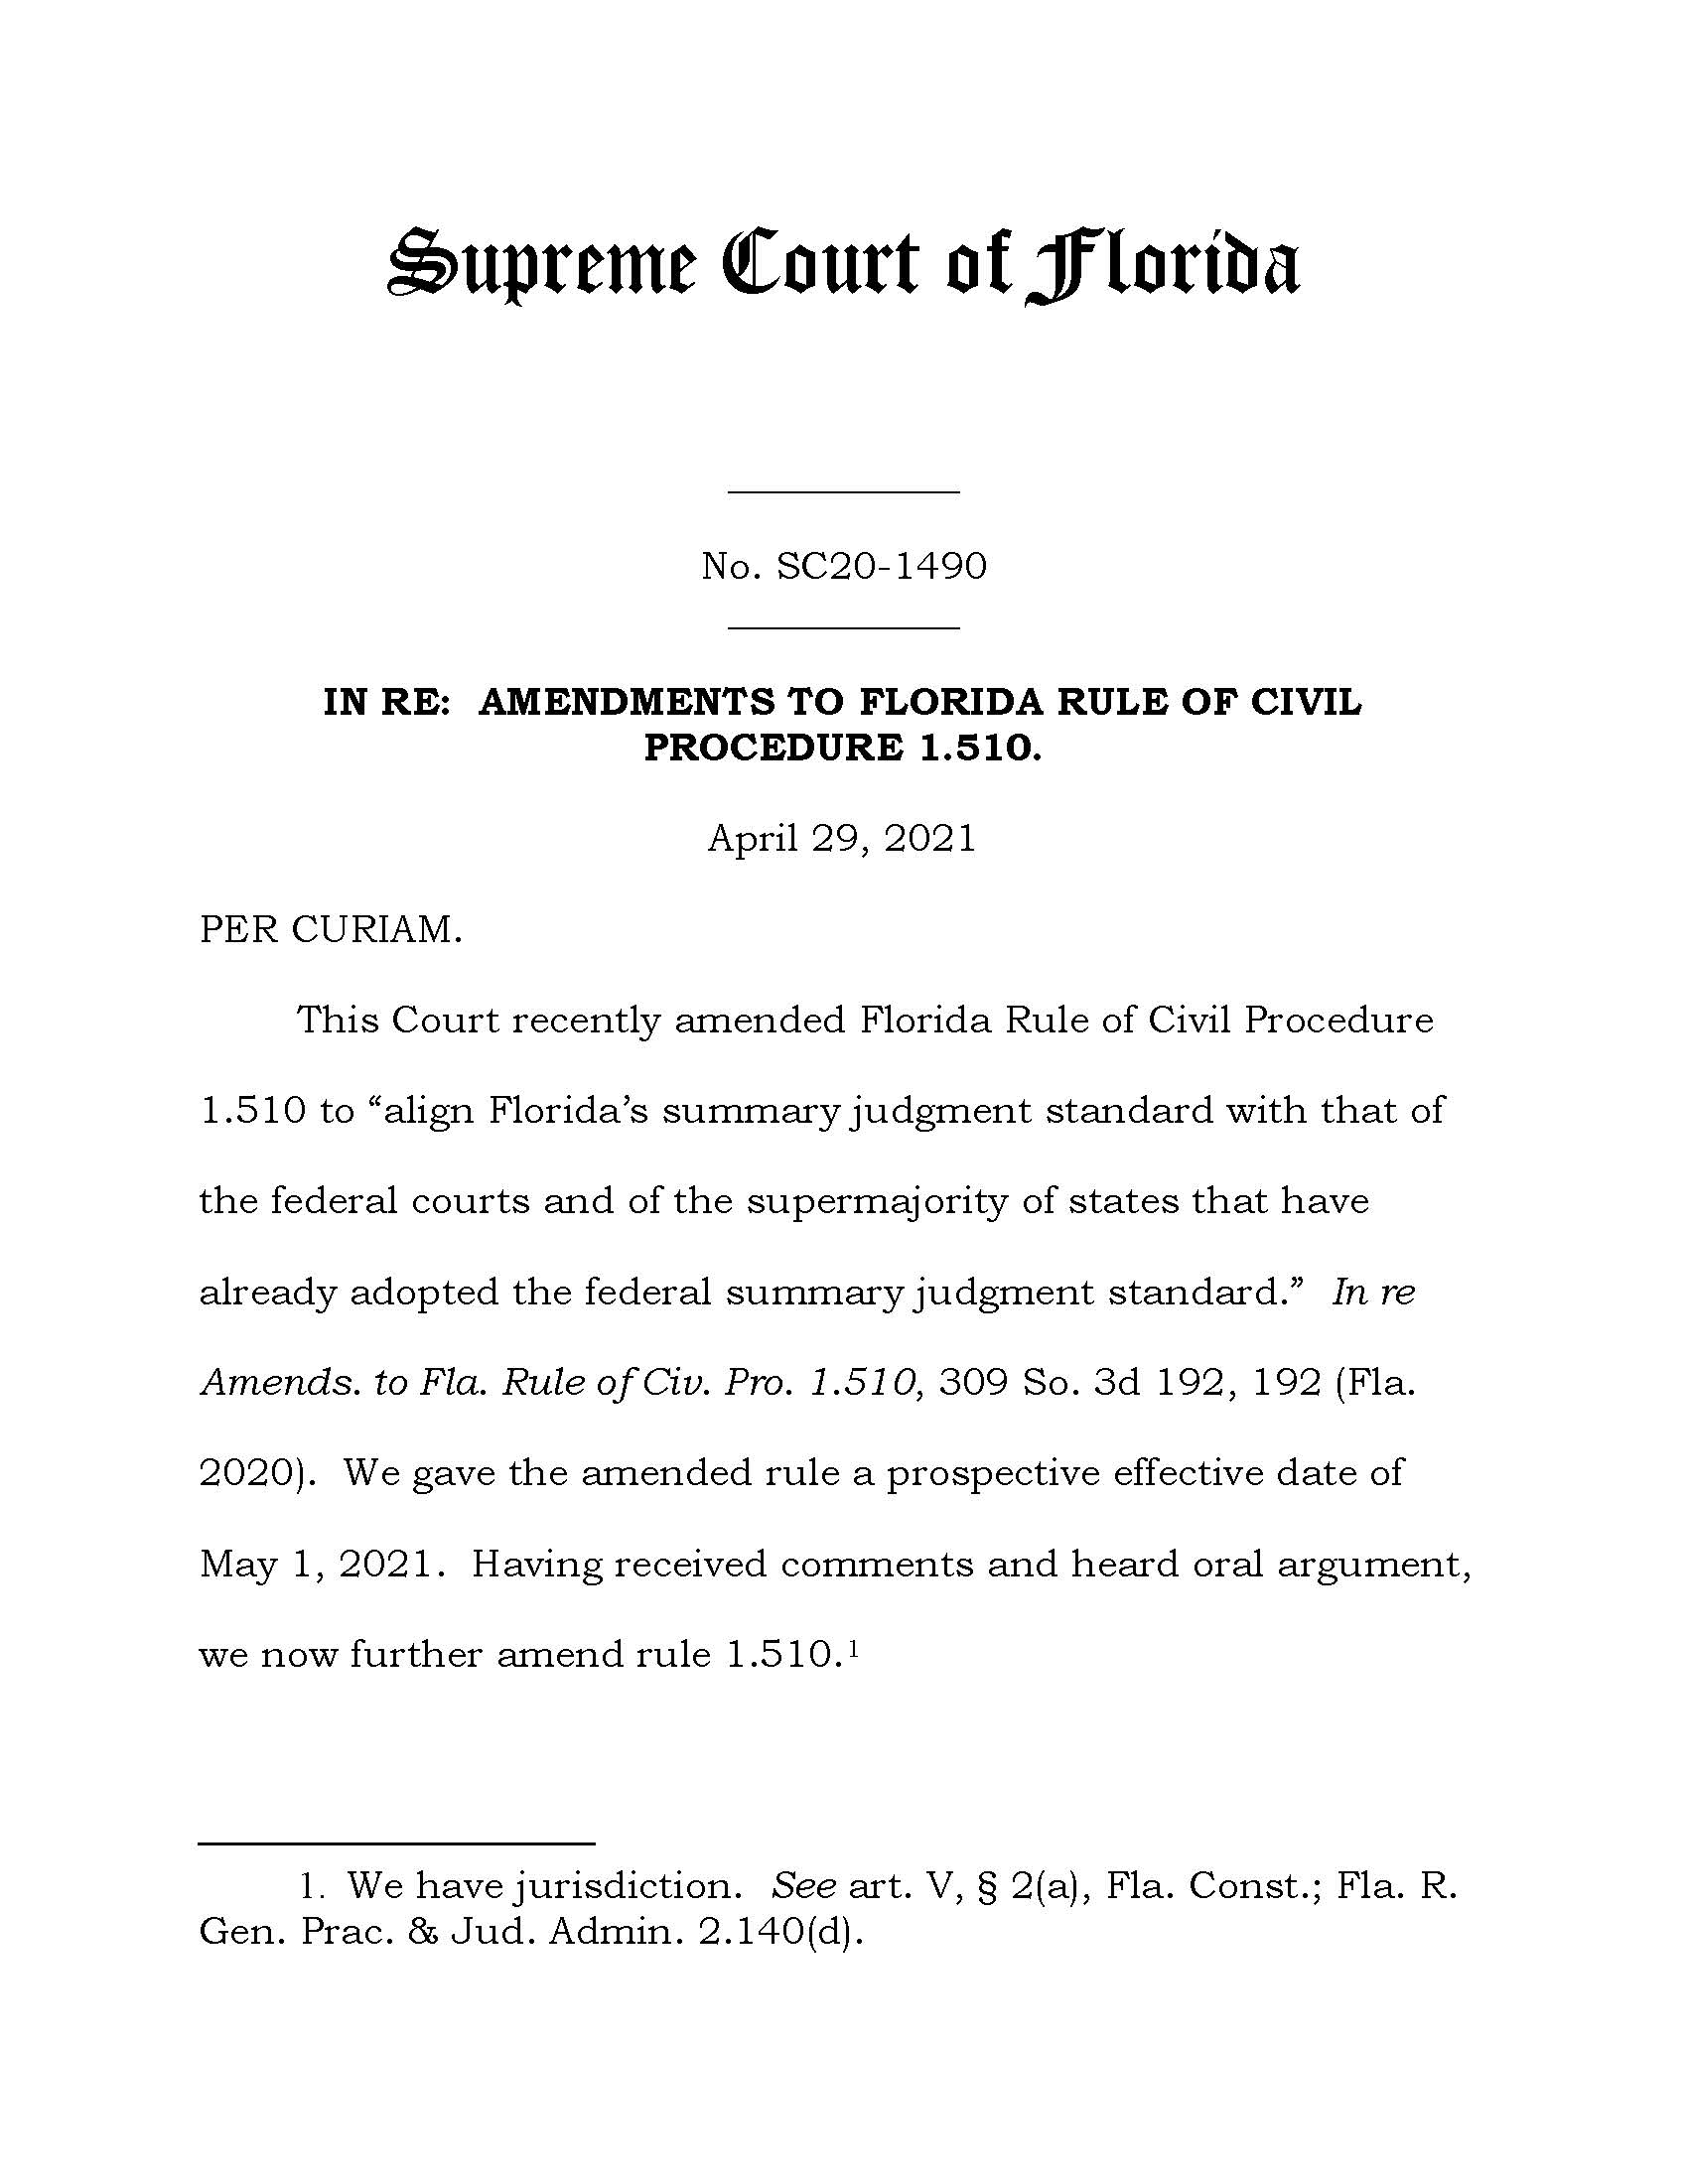 Florida Officially Amends Its Summary Judgment Rule Ahead of the